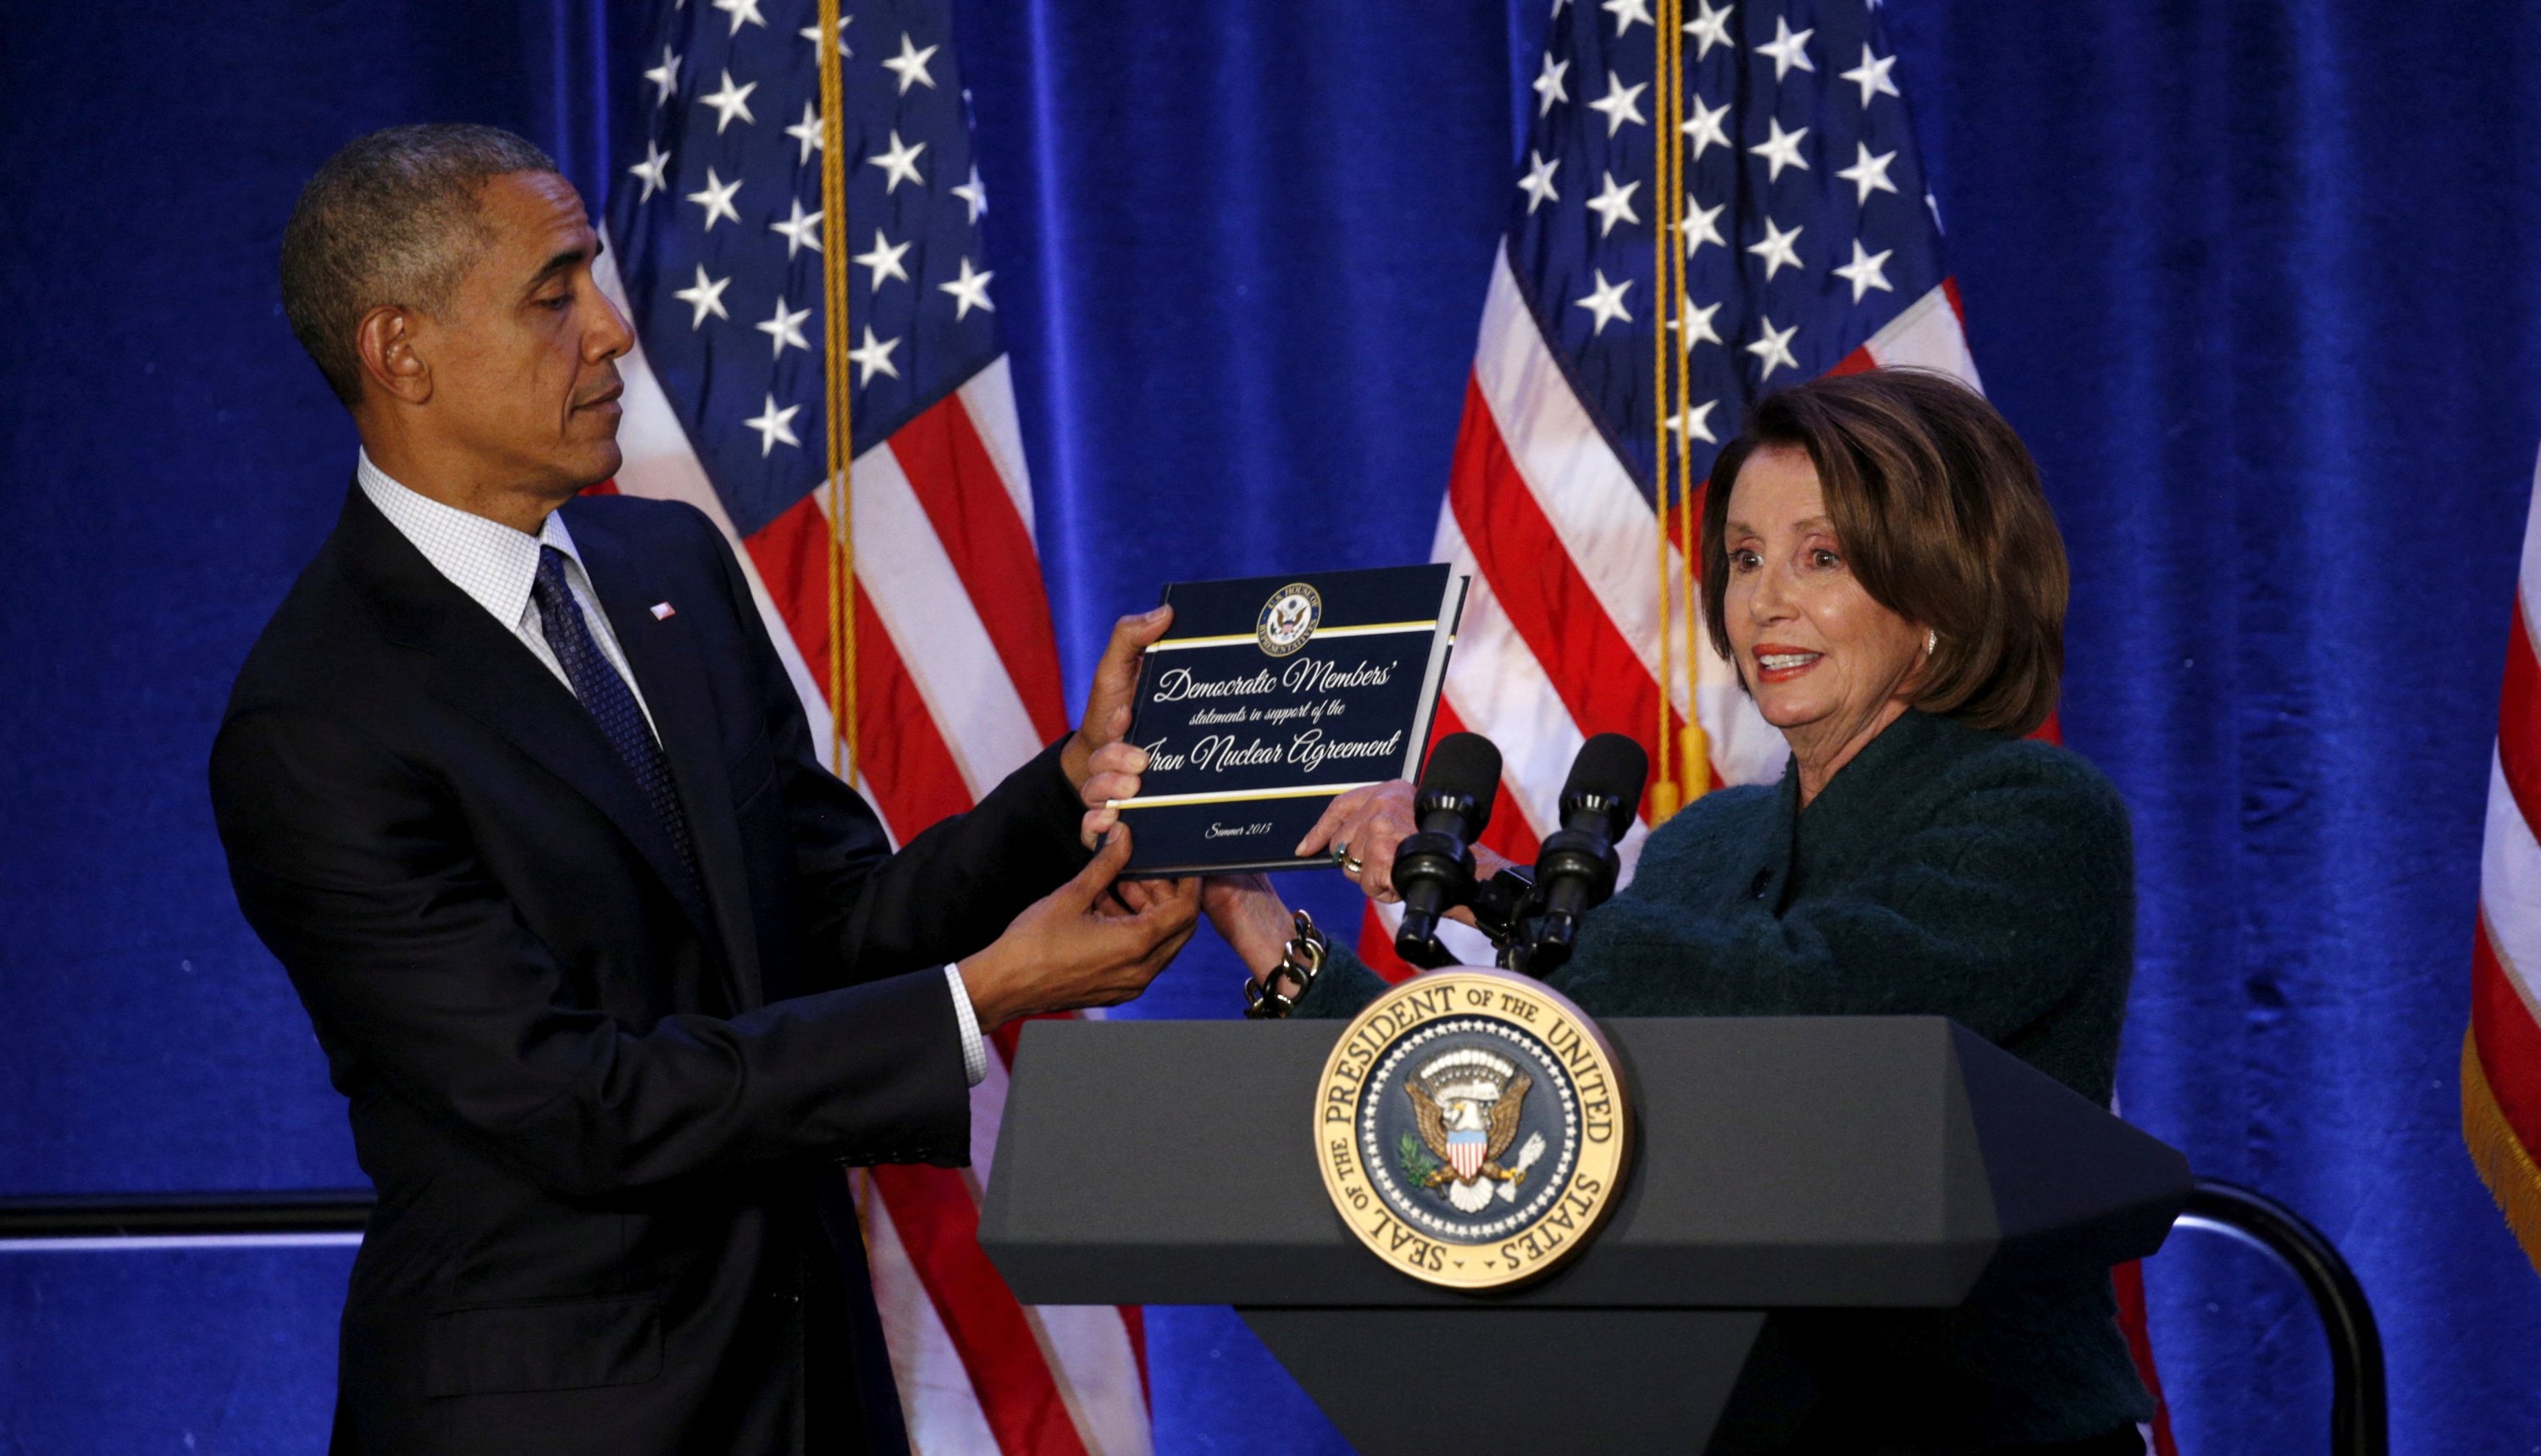 House Democratic leader Nancy Pelosi presents U.S. President Barack Obama with a book containing Democratic members' statements of support on the Iran nuclear agreement, during the House Democratic Issues Conference in Baltimore, Maryland, U.S., Jan. 28, 2016. (Reuters File Photo)